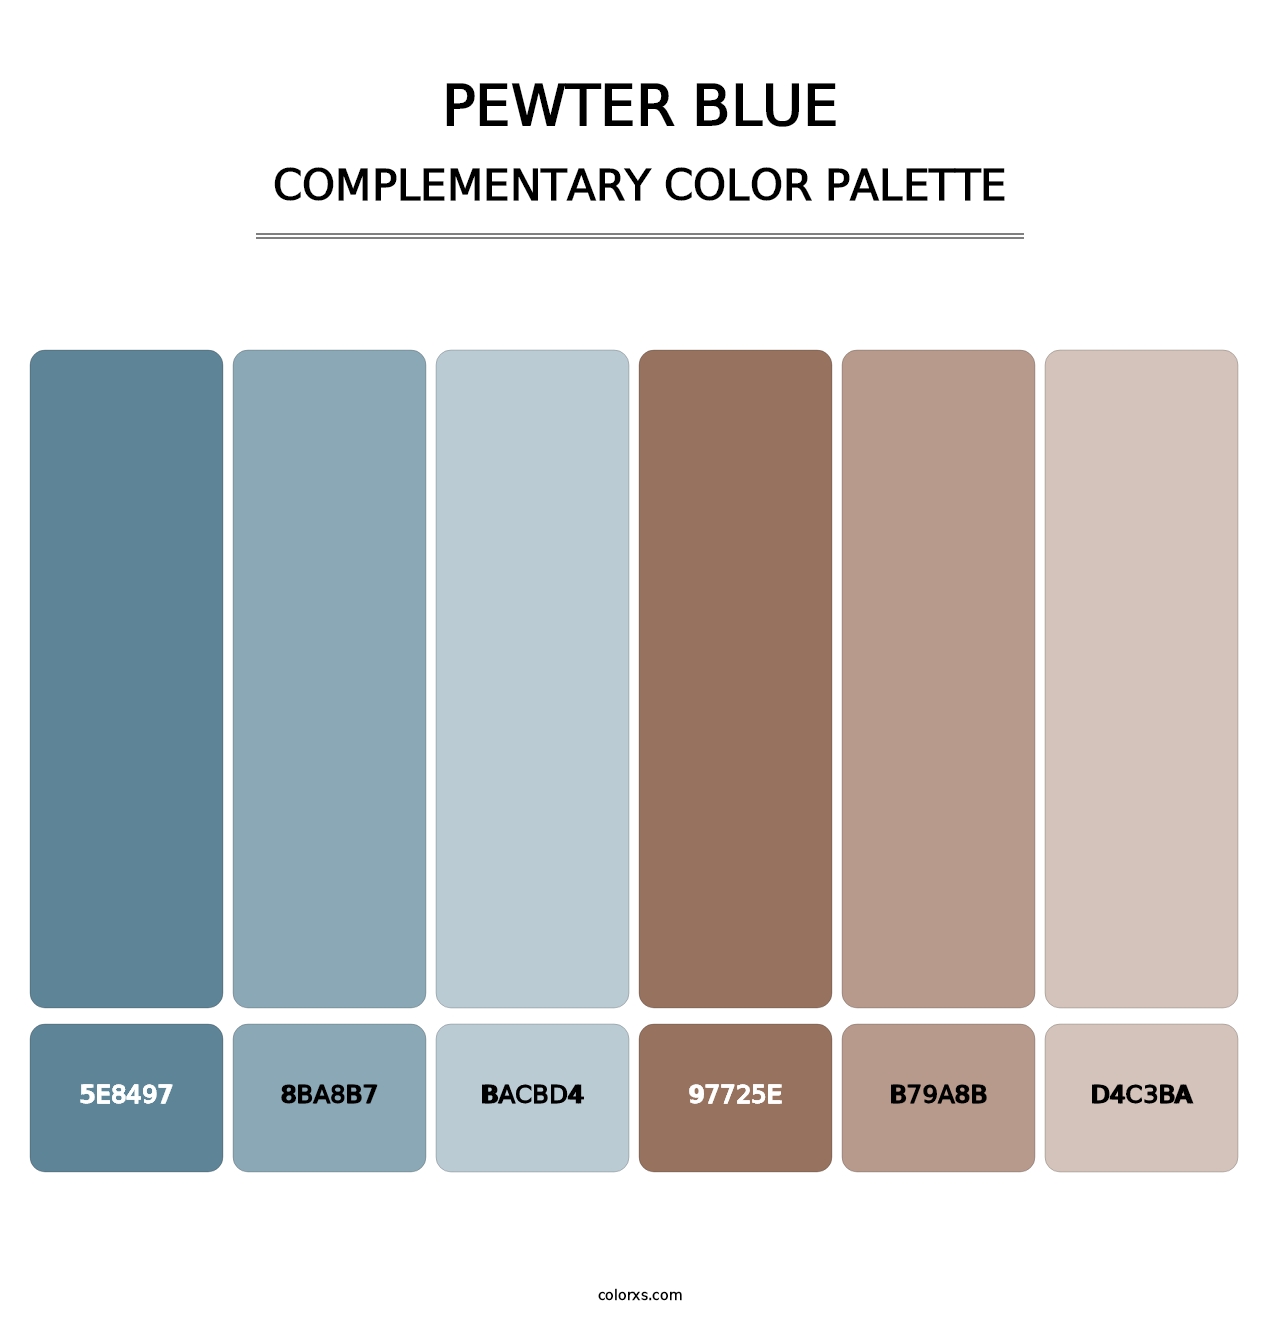 Pewter Blue - Complementary Color Palette